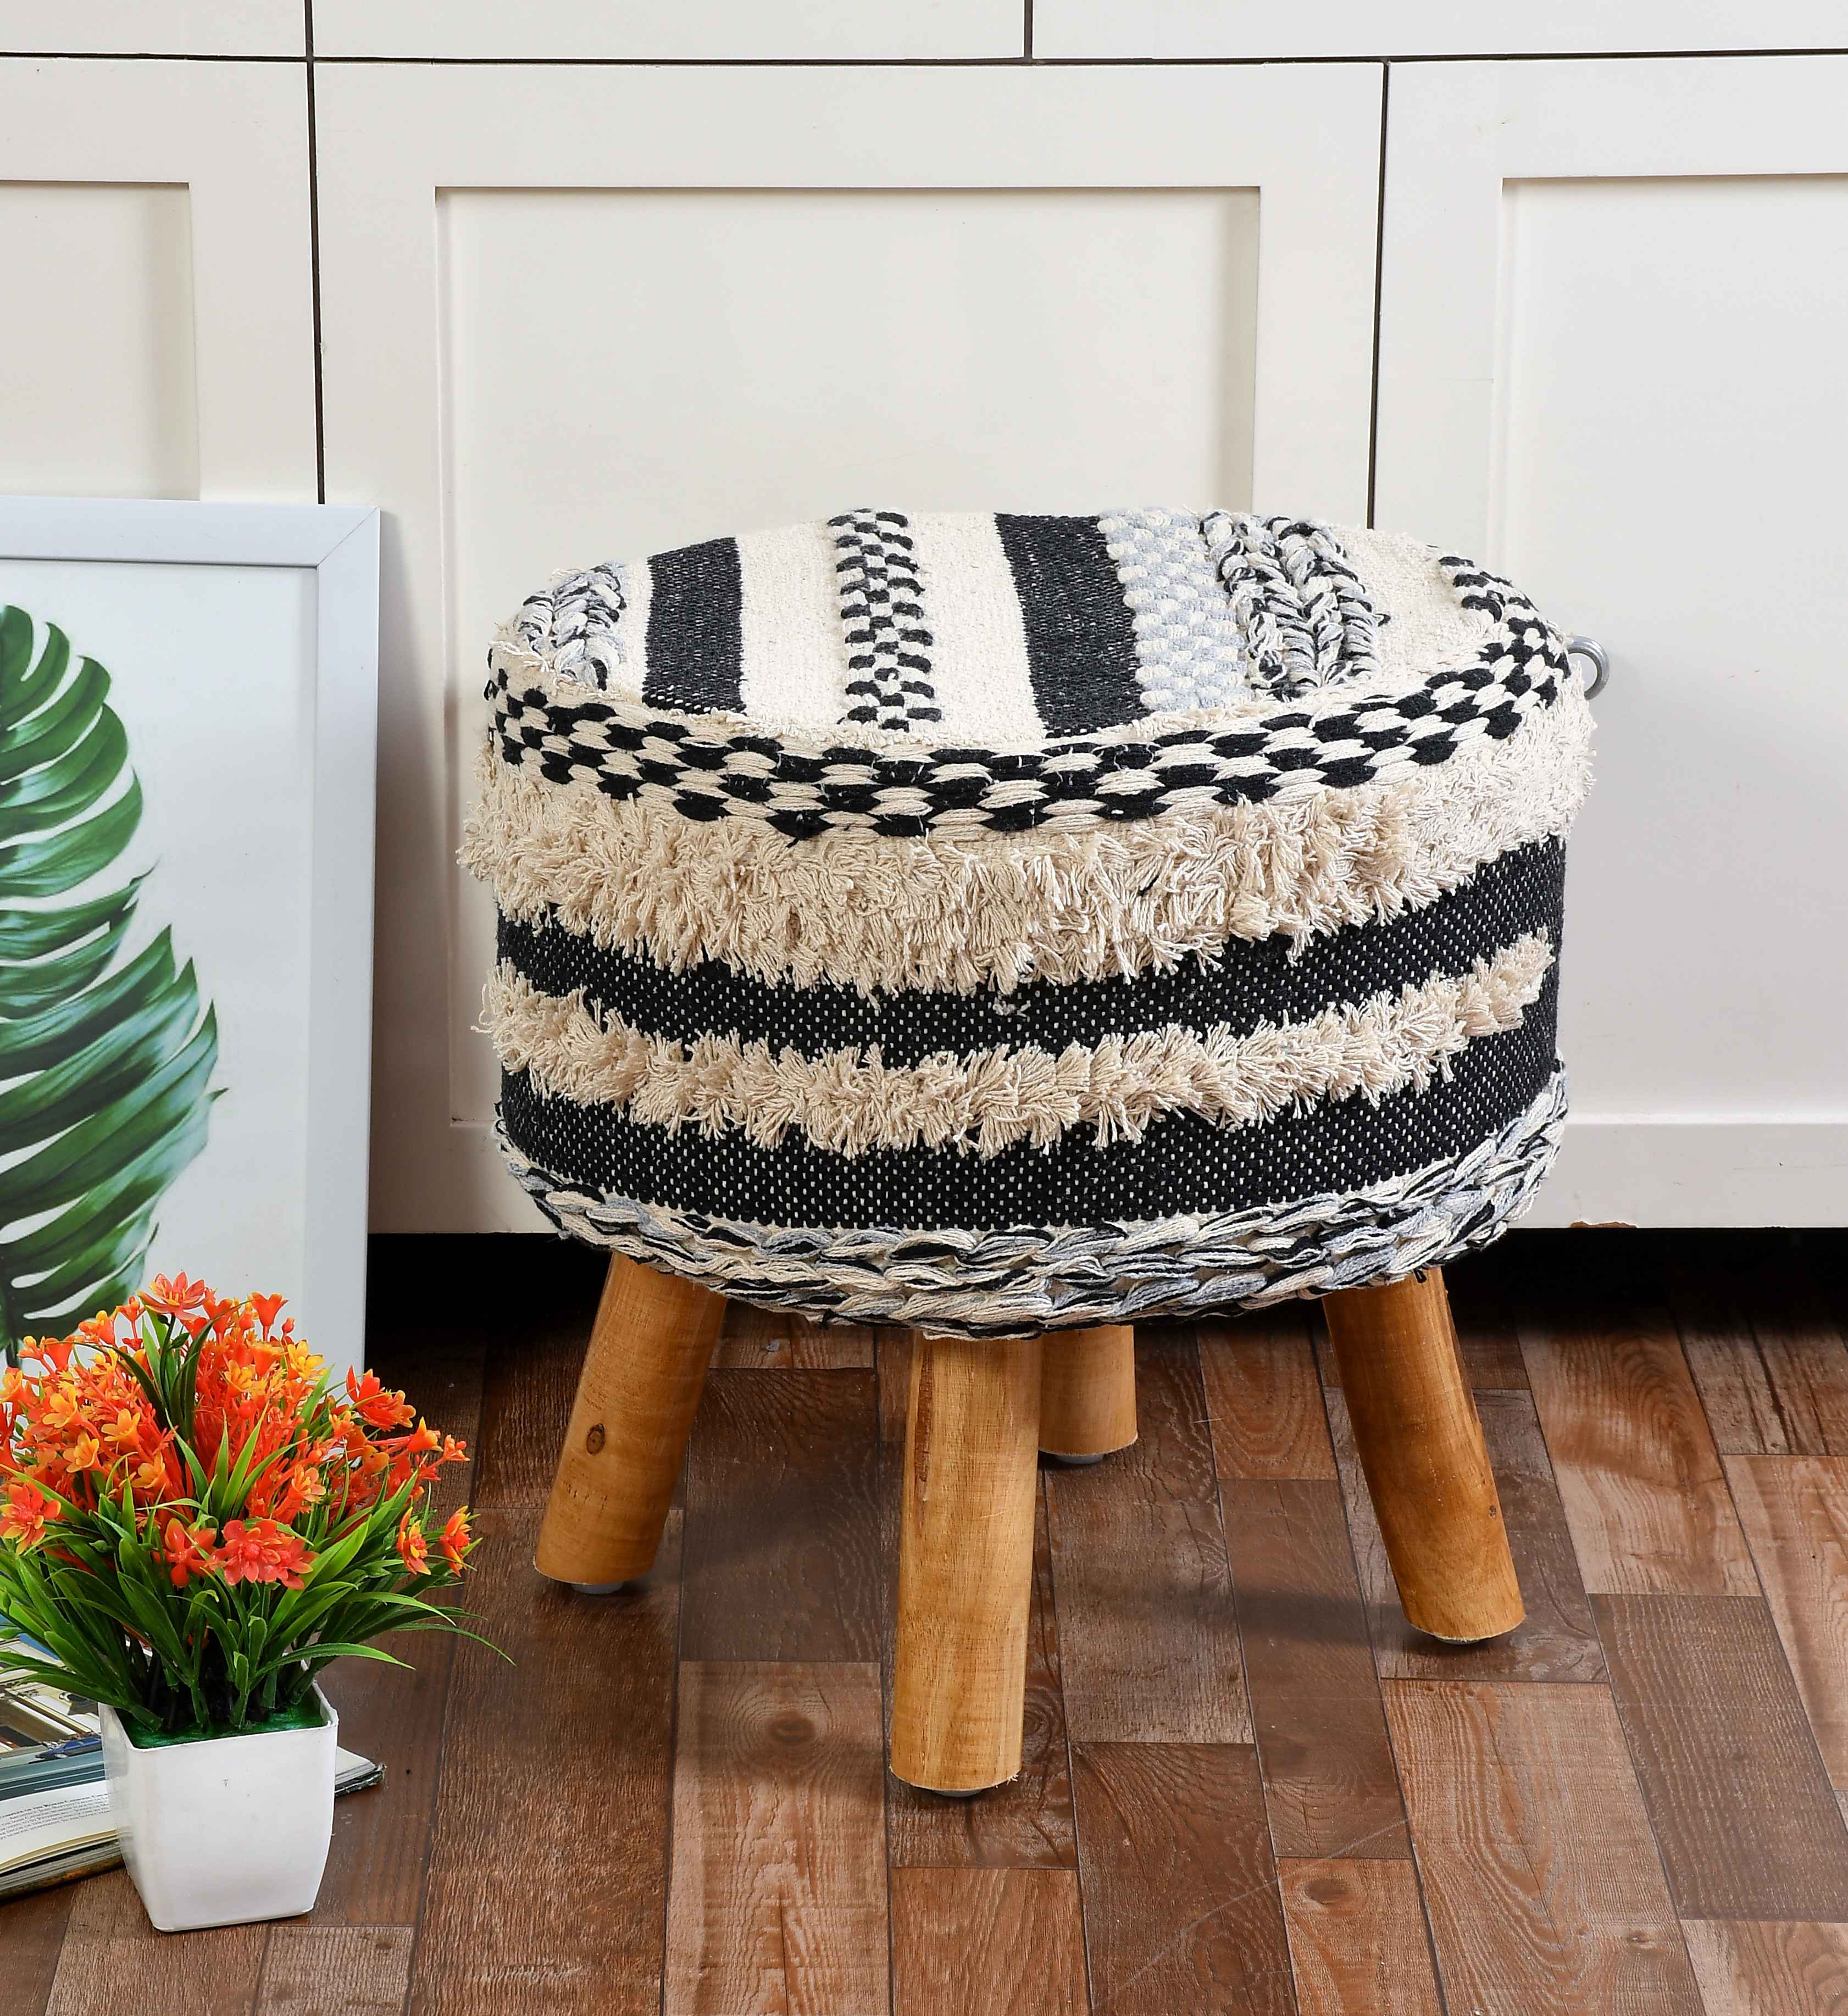 Patterned Paragon Ottomans 11